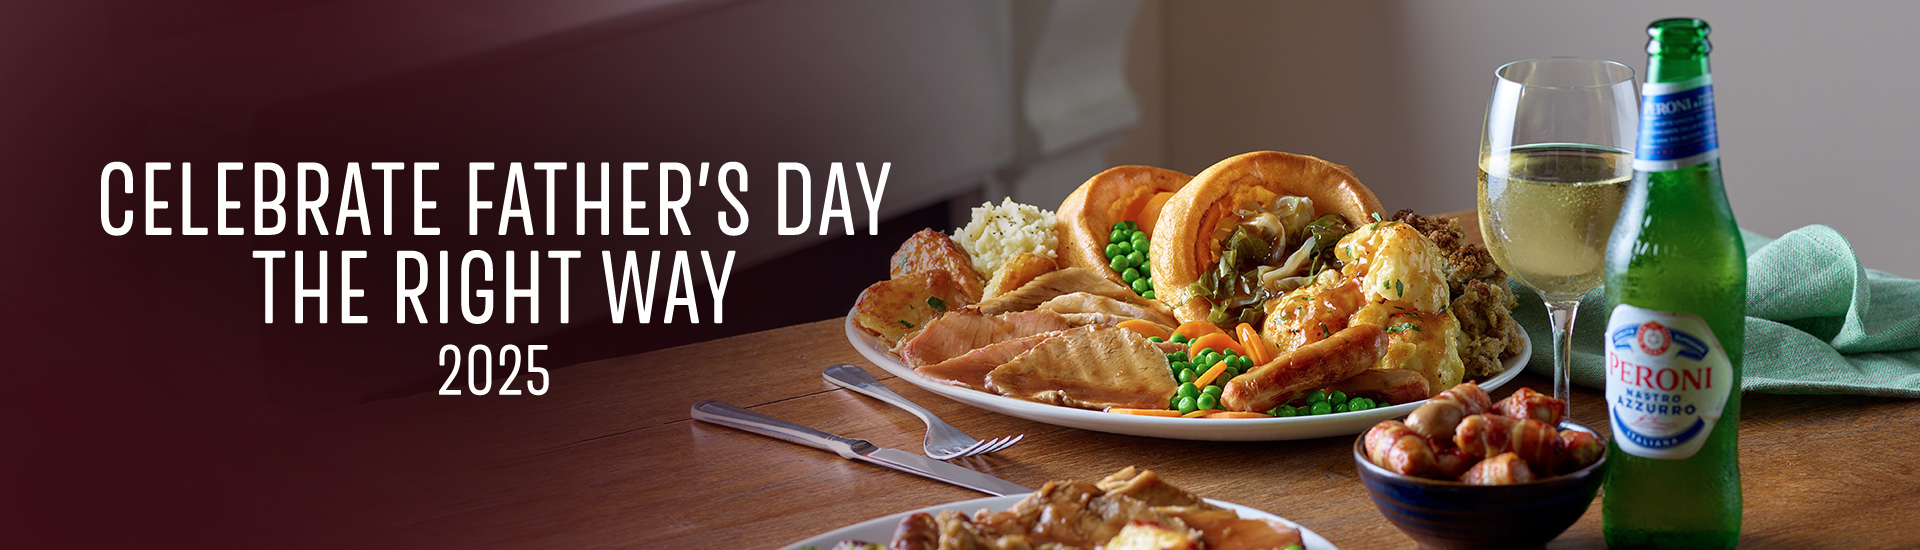 Father’s day carvery in Leeds